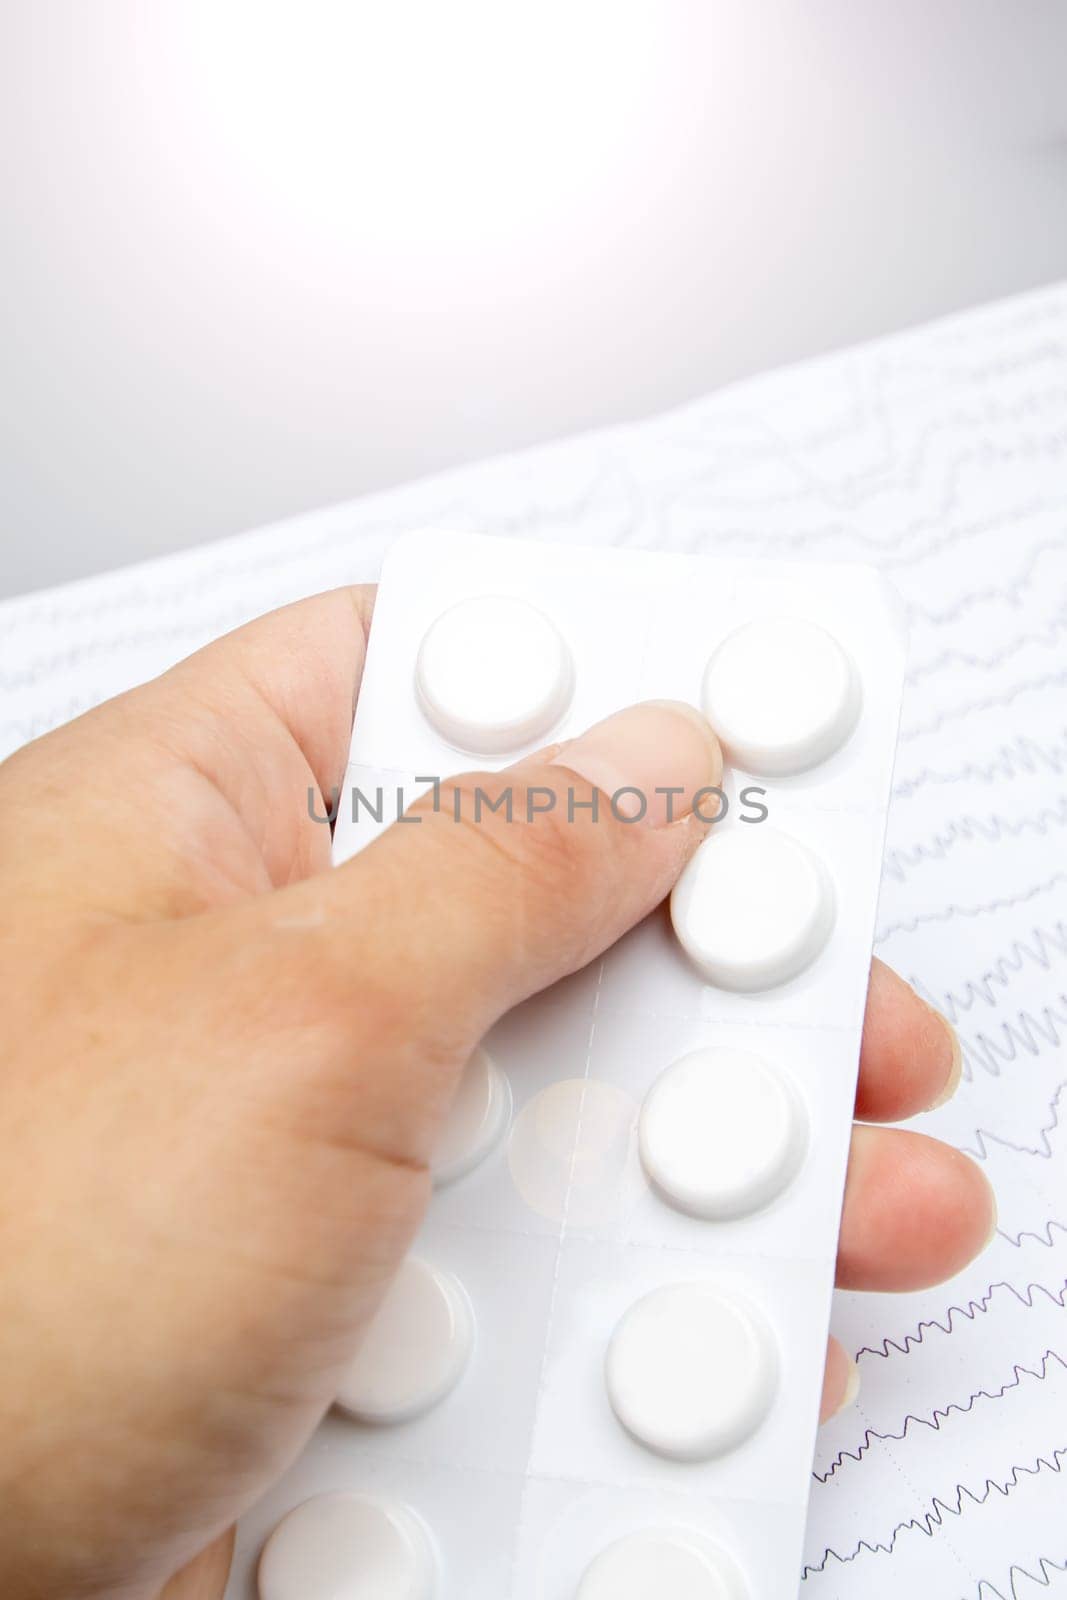 The person is holding a blister pack of pills in their thumb and finger by Vera1703